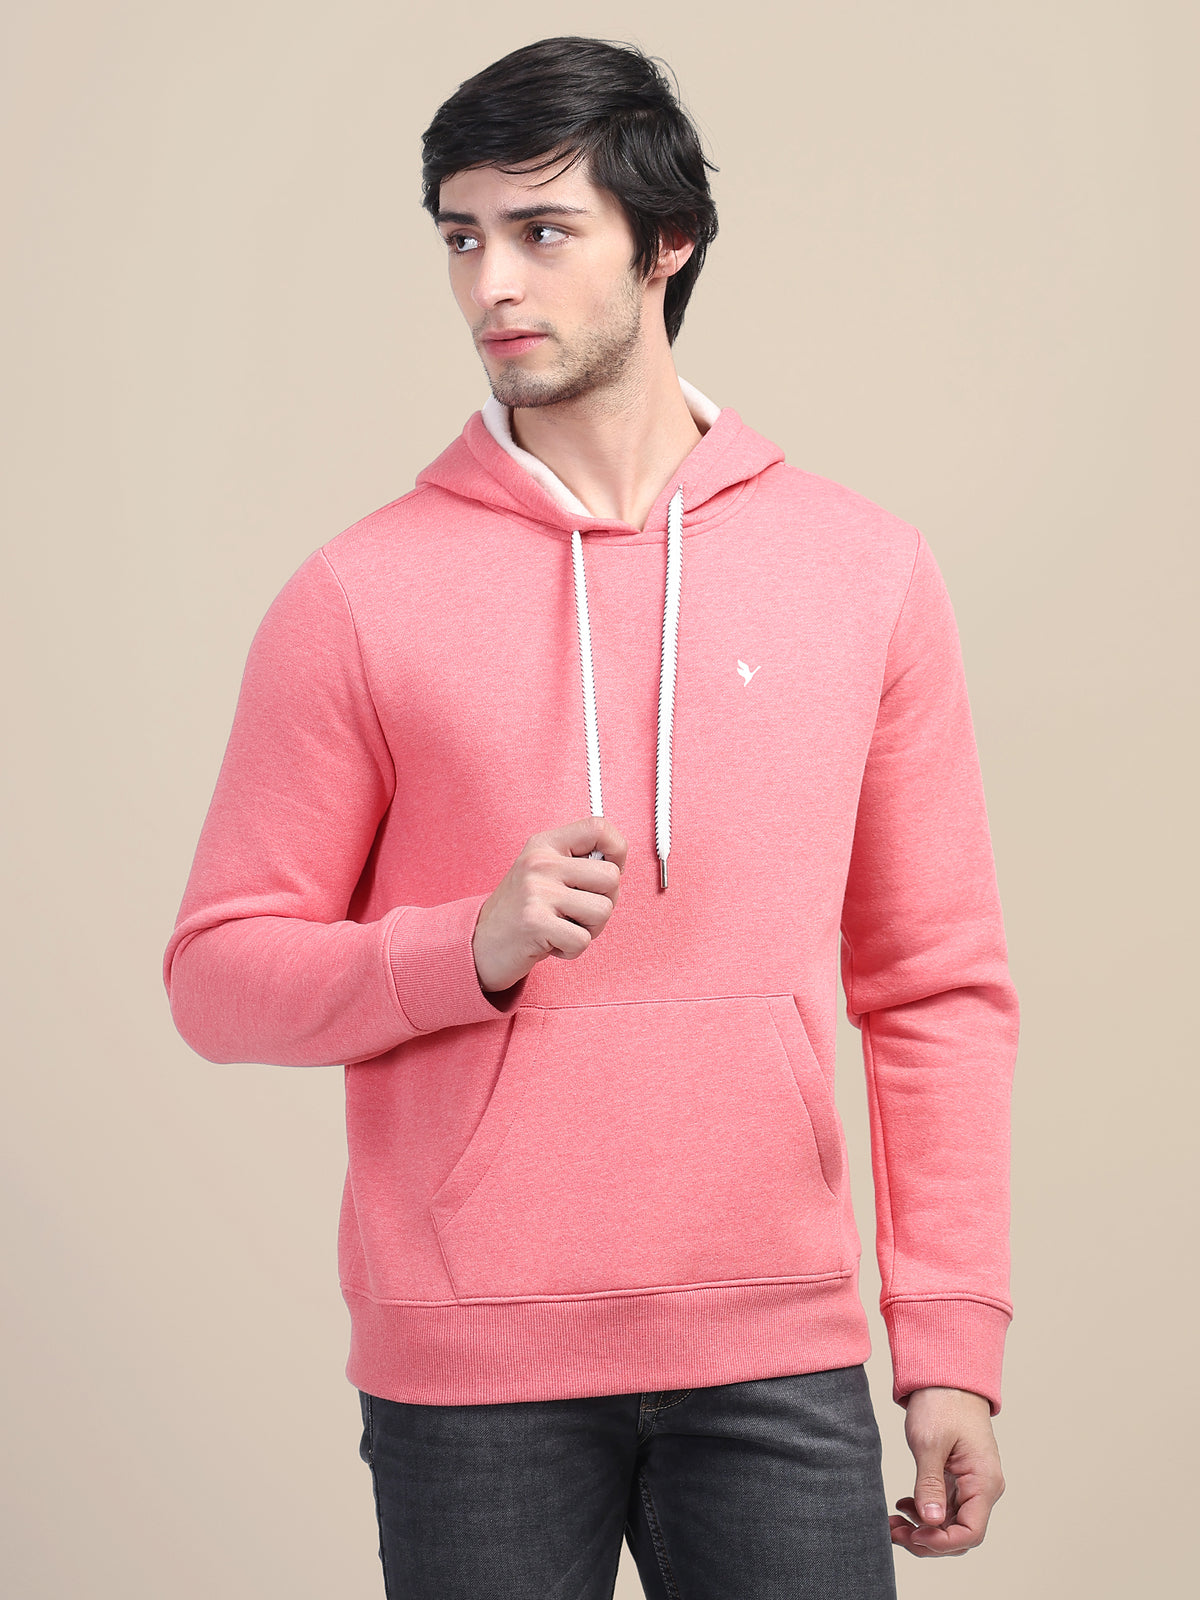 AMSWAN MEN'S PINK STYLISH AND COMFORT FIT HOODIE